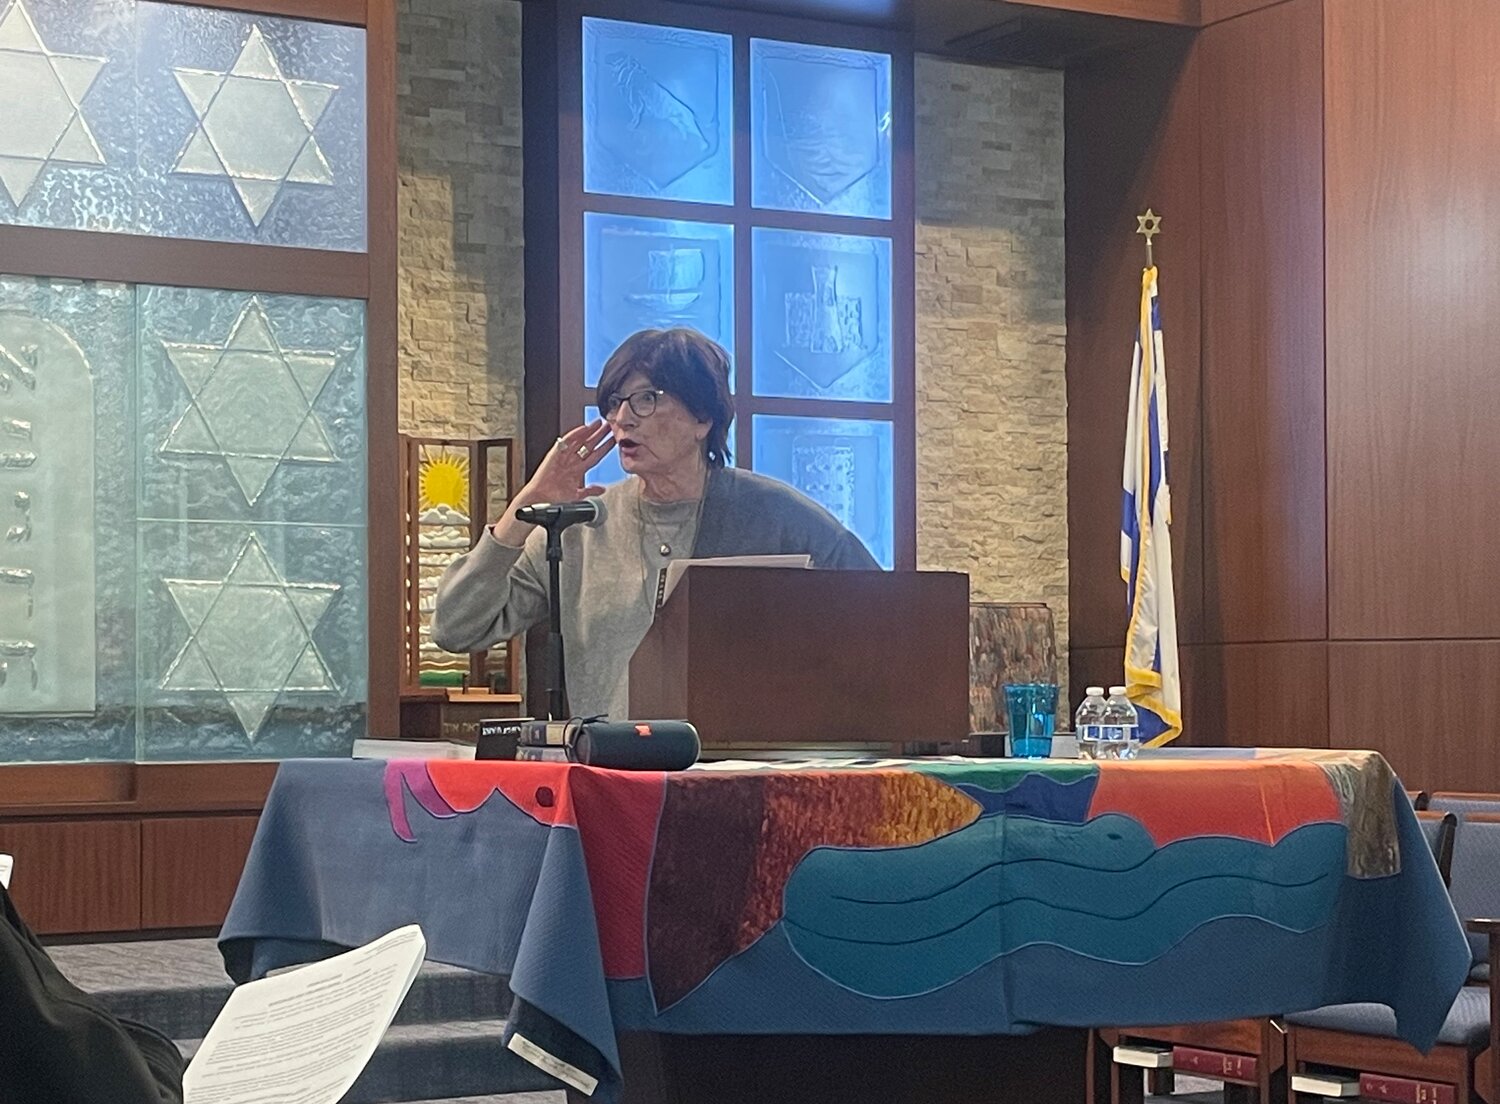 Yiscah Smith, a speaker, thought leader and spiritual activist who’s based in Israel, visited Congregation Beth Ohr on Sunday to discuss ways to honor spirit in times of war.